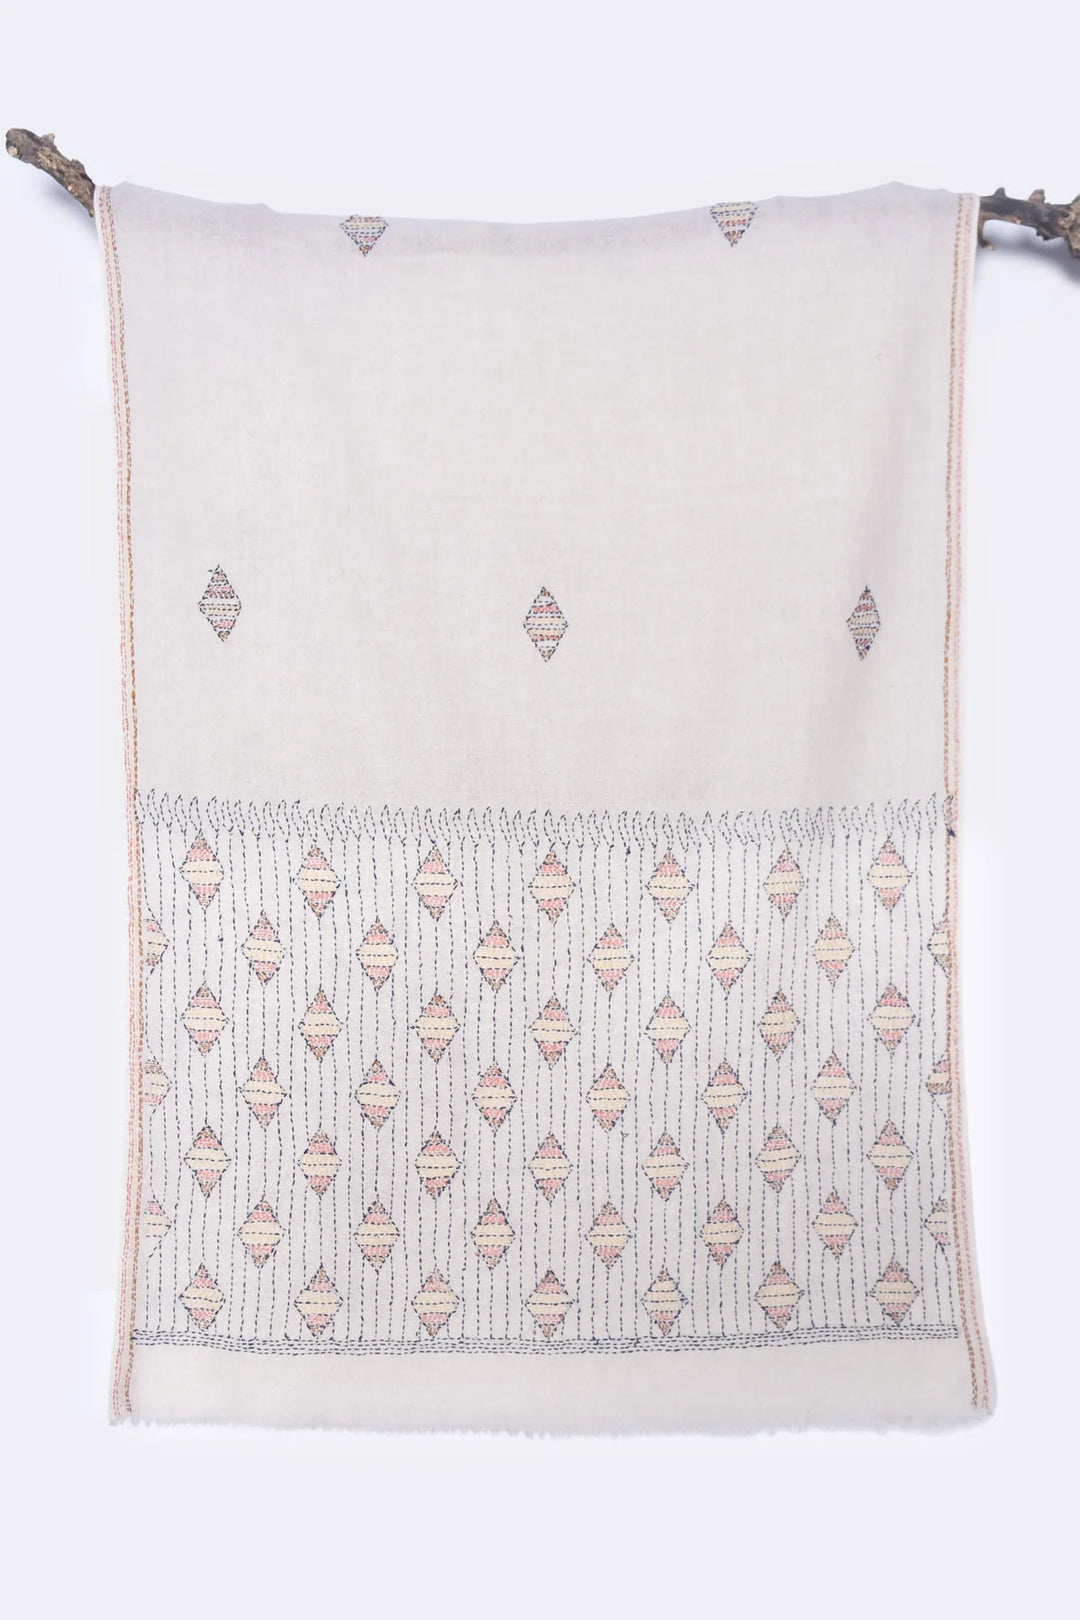 White Cashmere Stole with Hand Embroidery - Timeless and Versatile | Zaara Handwoven Soft Cashmere Stole - White